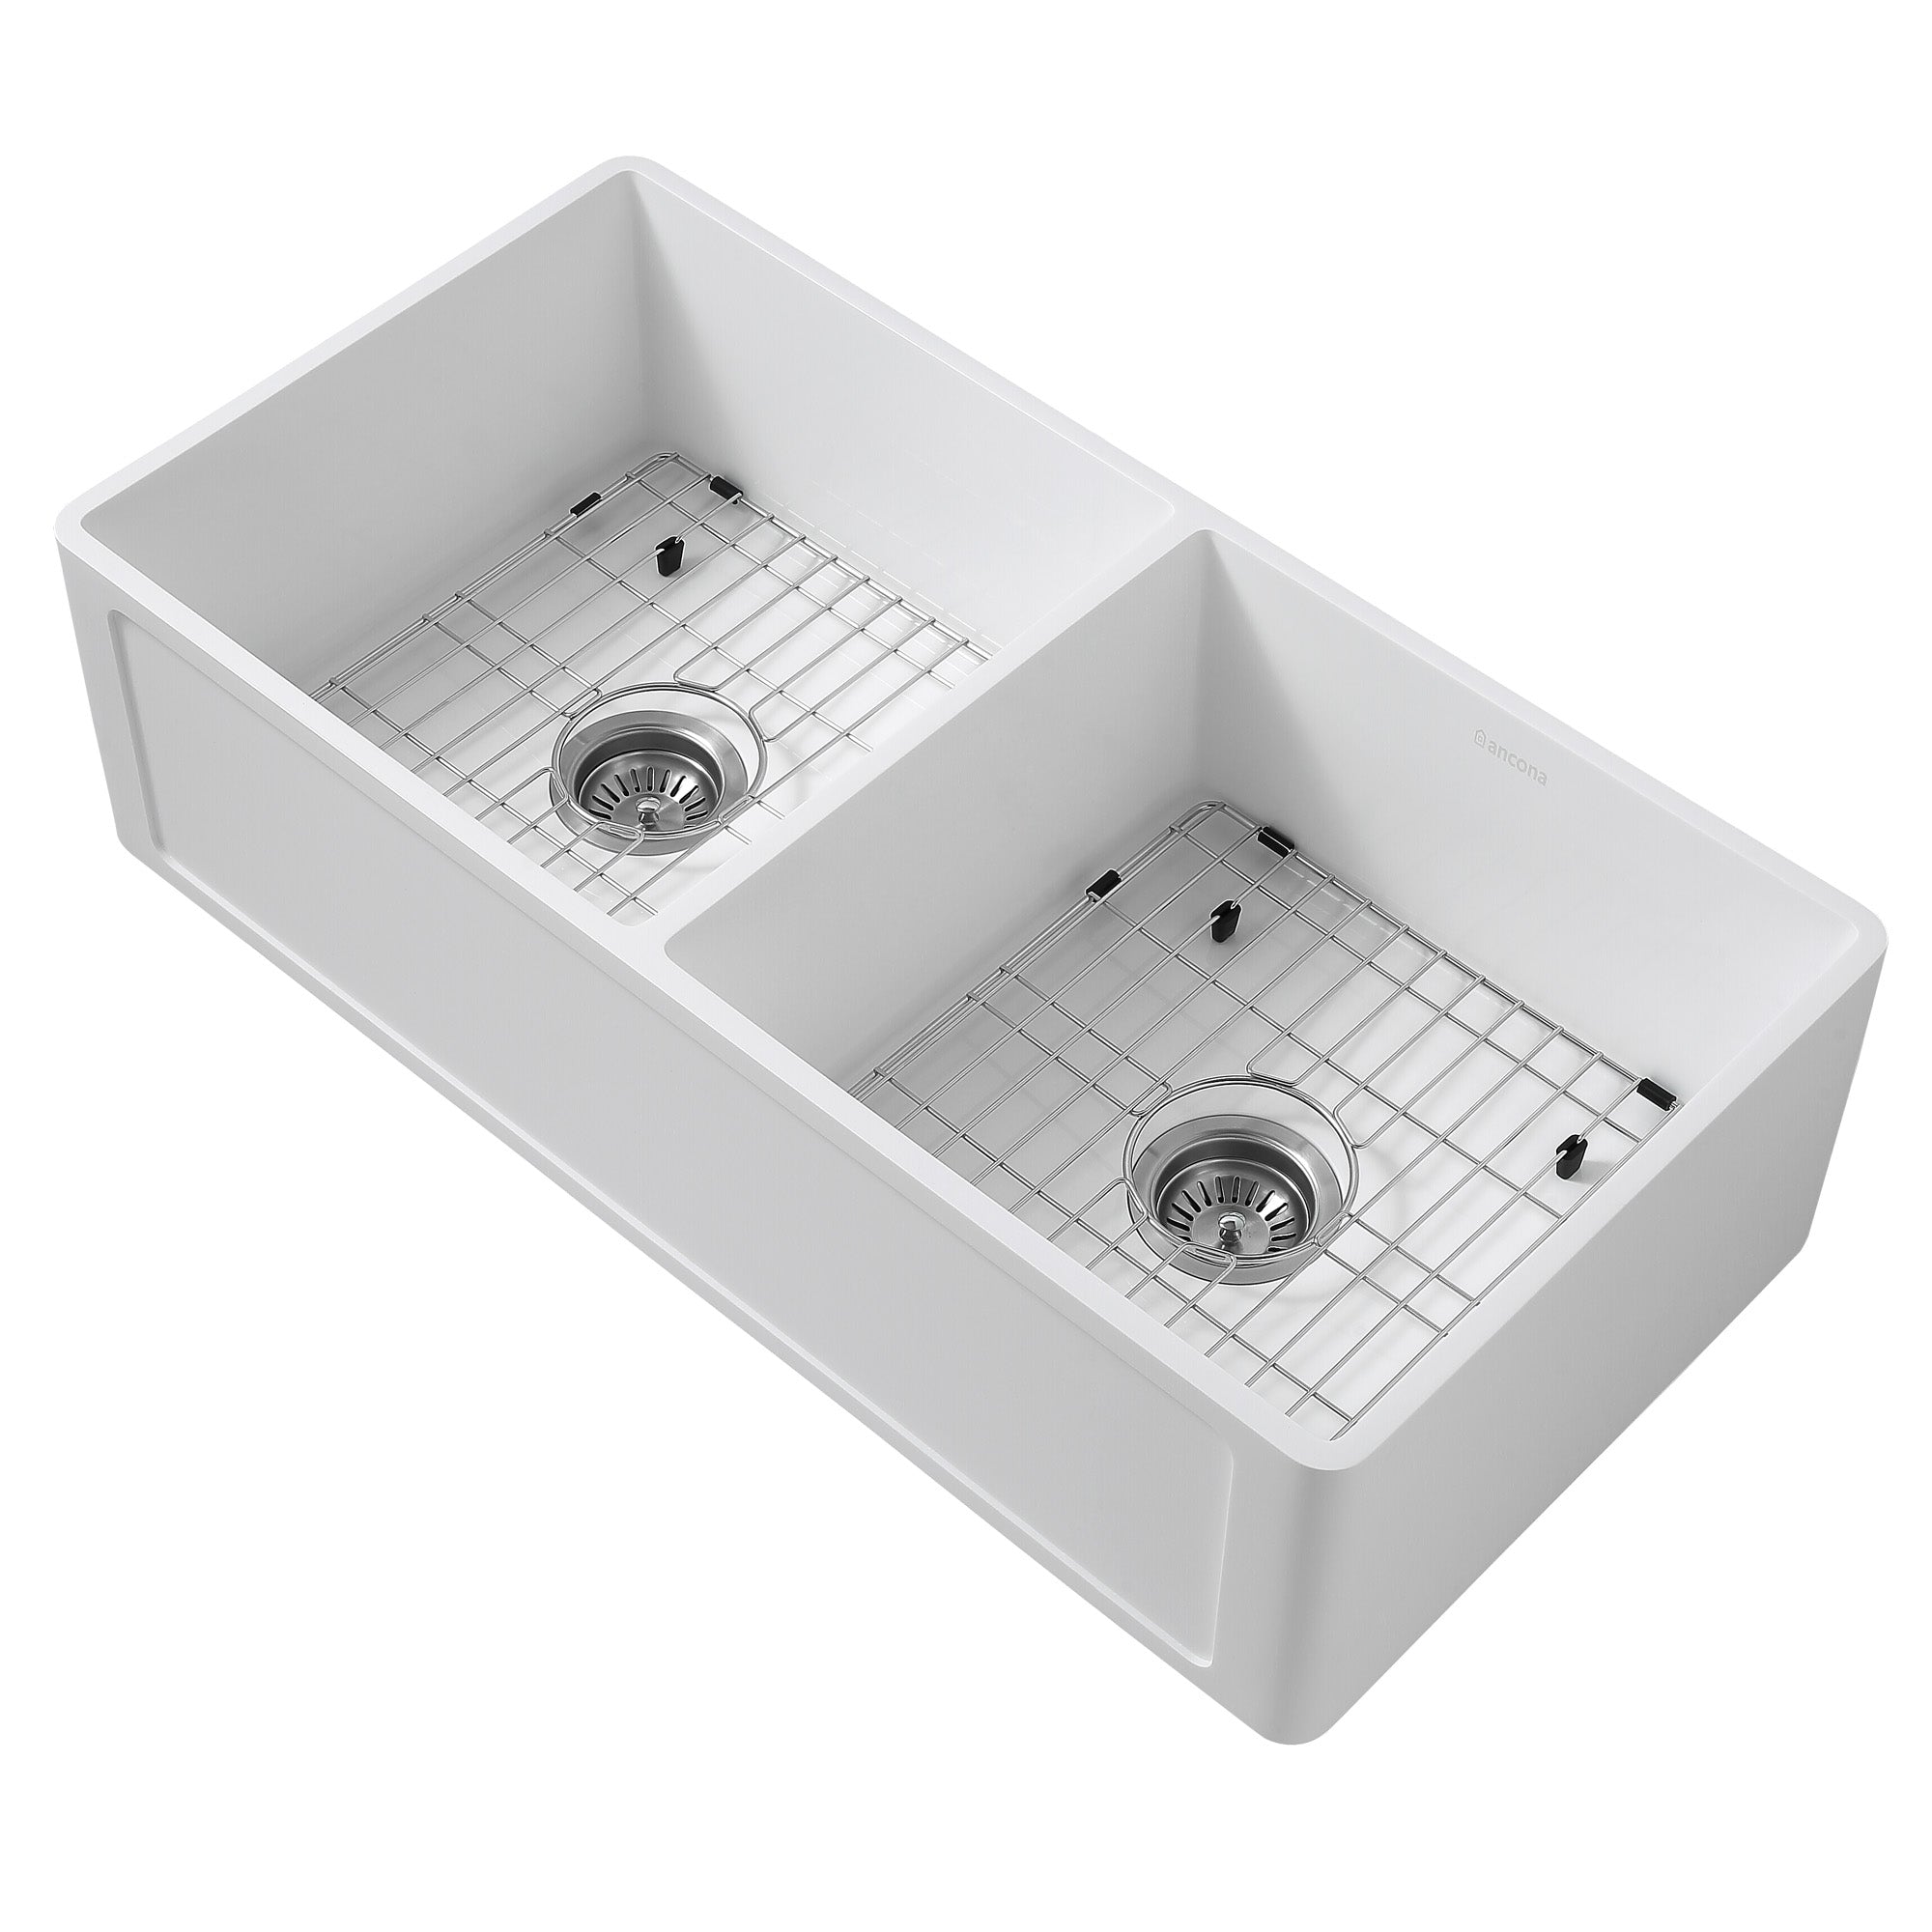 Ancona 36” Undermount Farmhouse 50/50 Double Bowl Apron Front Sink in Pure Acrylic Stone with Grid and Strainer in White